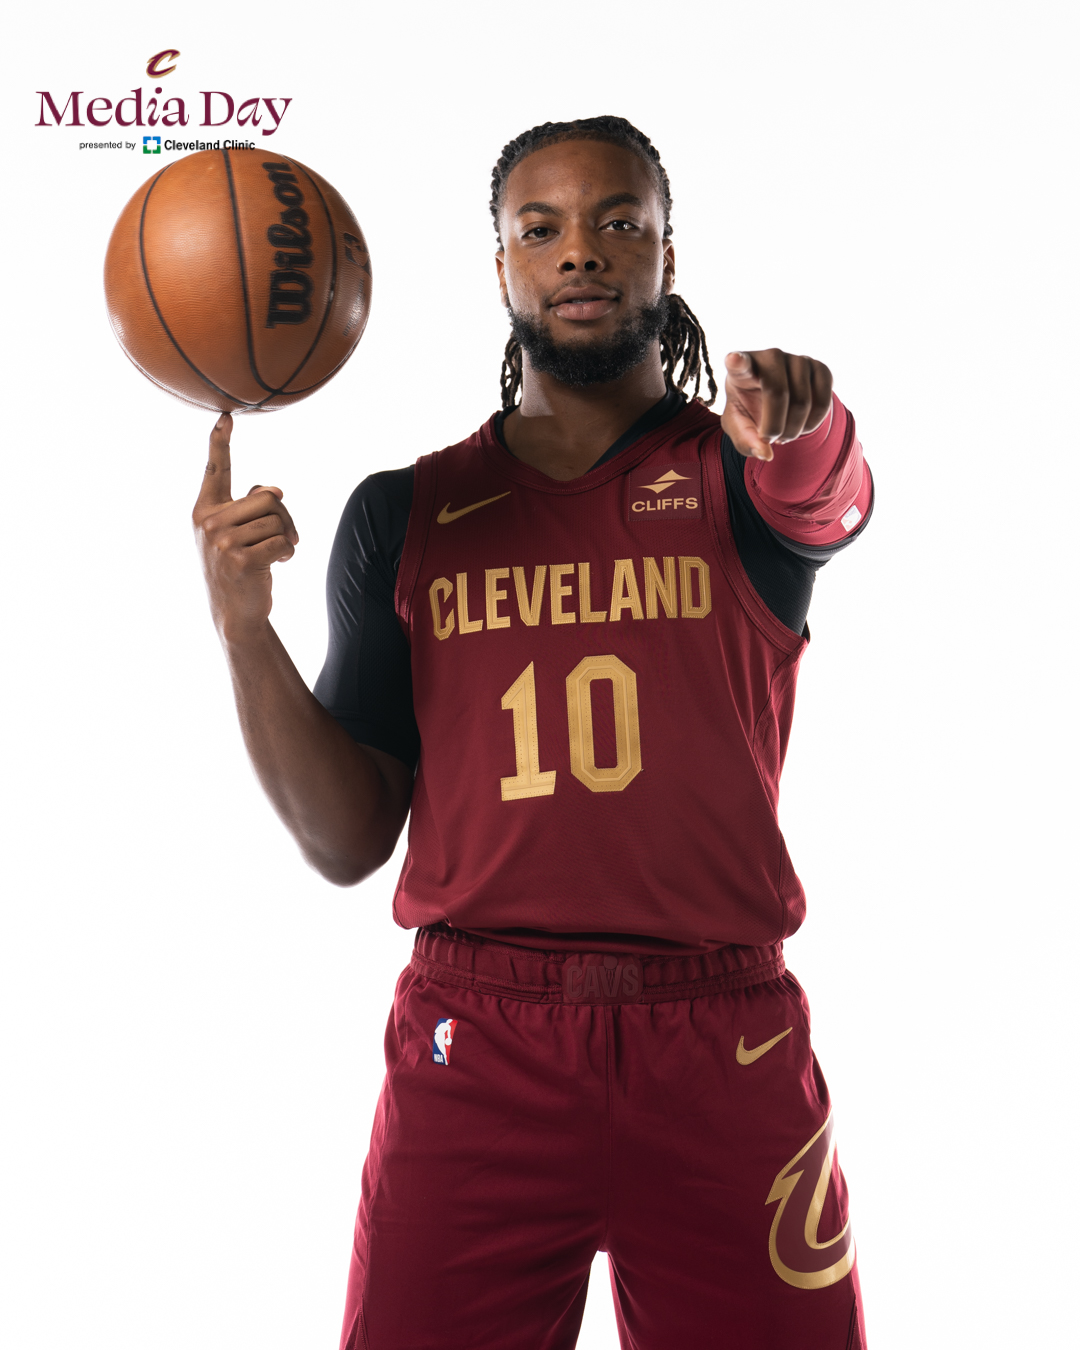 Cleveland Cavaliers Jerseys in Cleveland Cavaliers Team Shop 